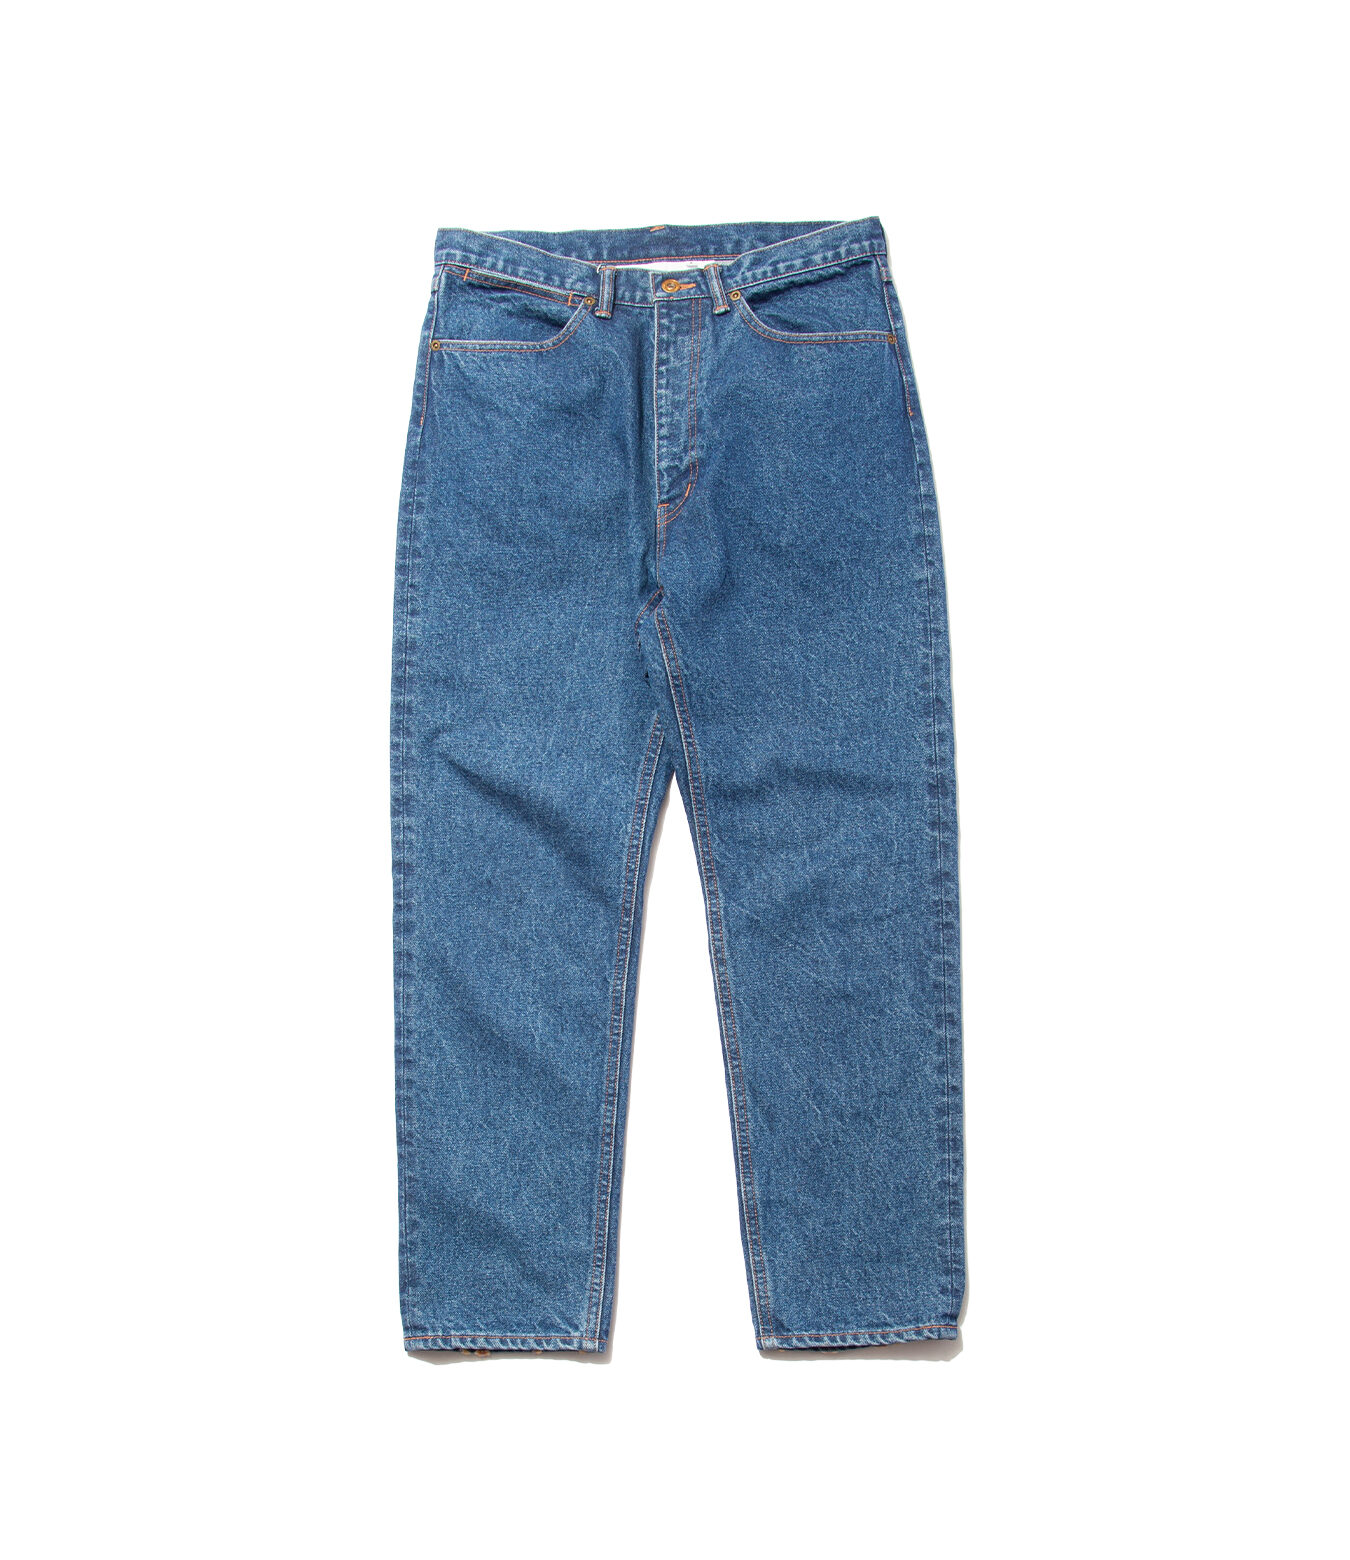 "JUDE" WITH GINKGO Standard by 80s Reproduced Denim　KYOU